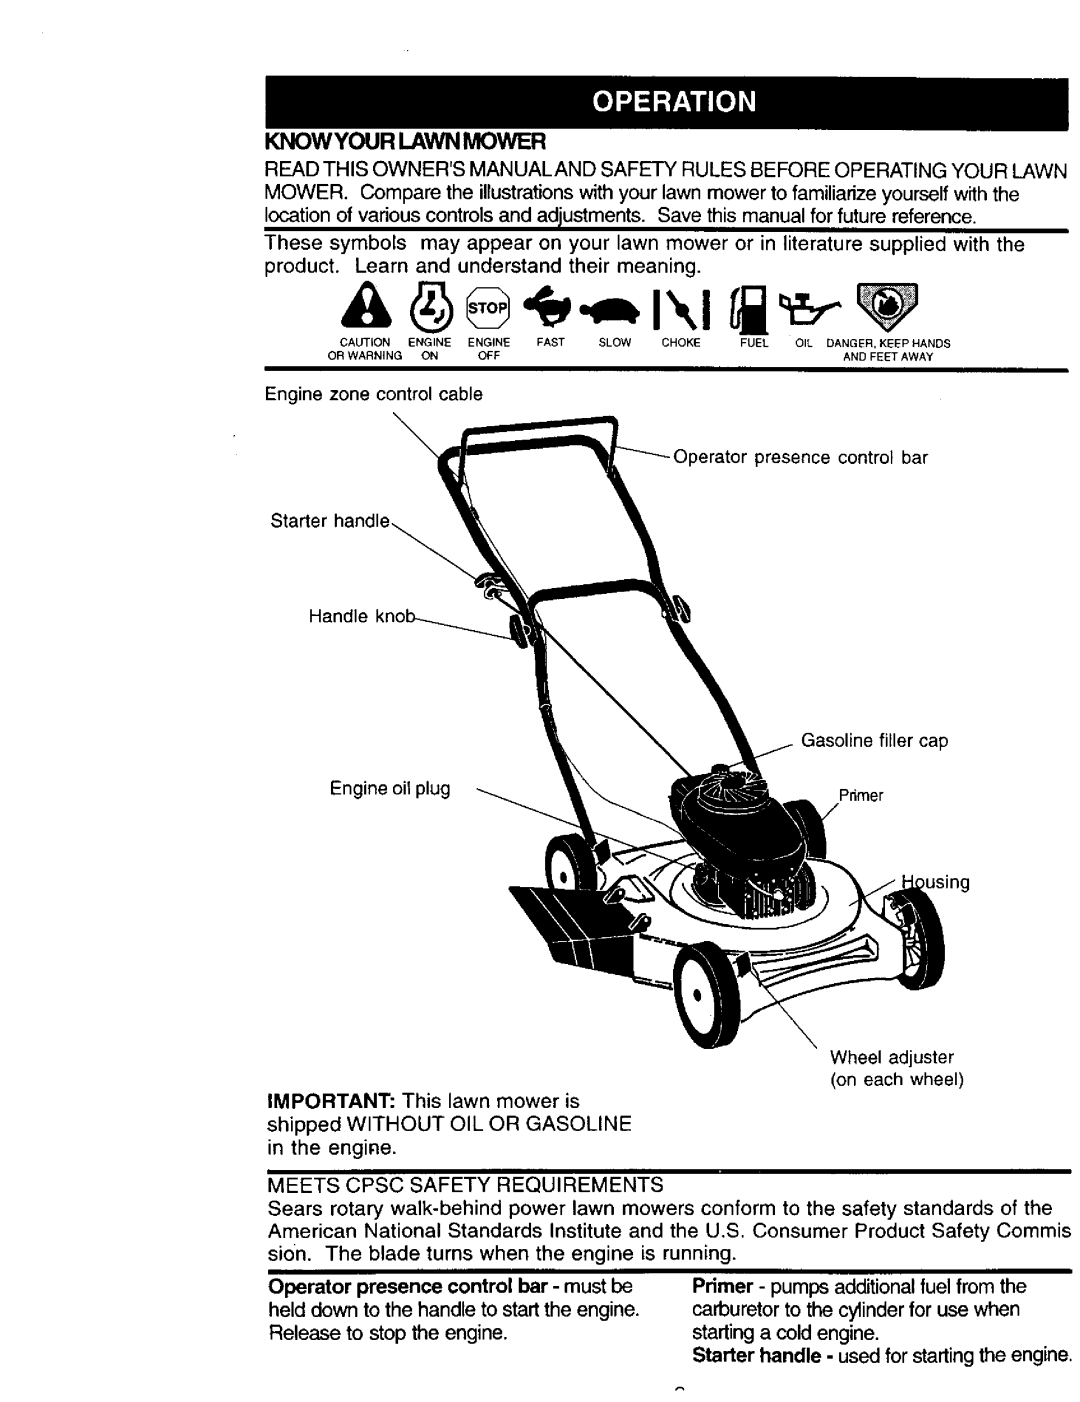 Craftsman 917.38741 owner manual Knowyour Lawn Mower, Starter handle - used for startingthe engine 